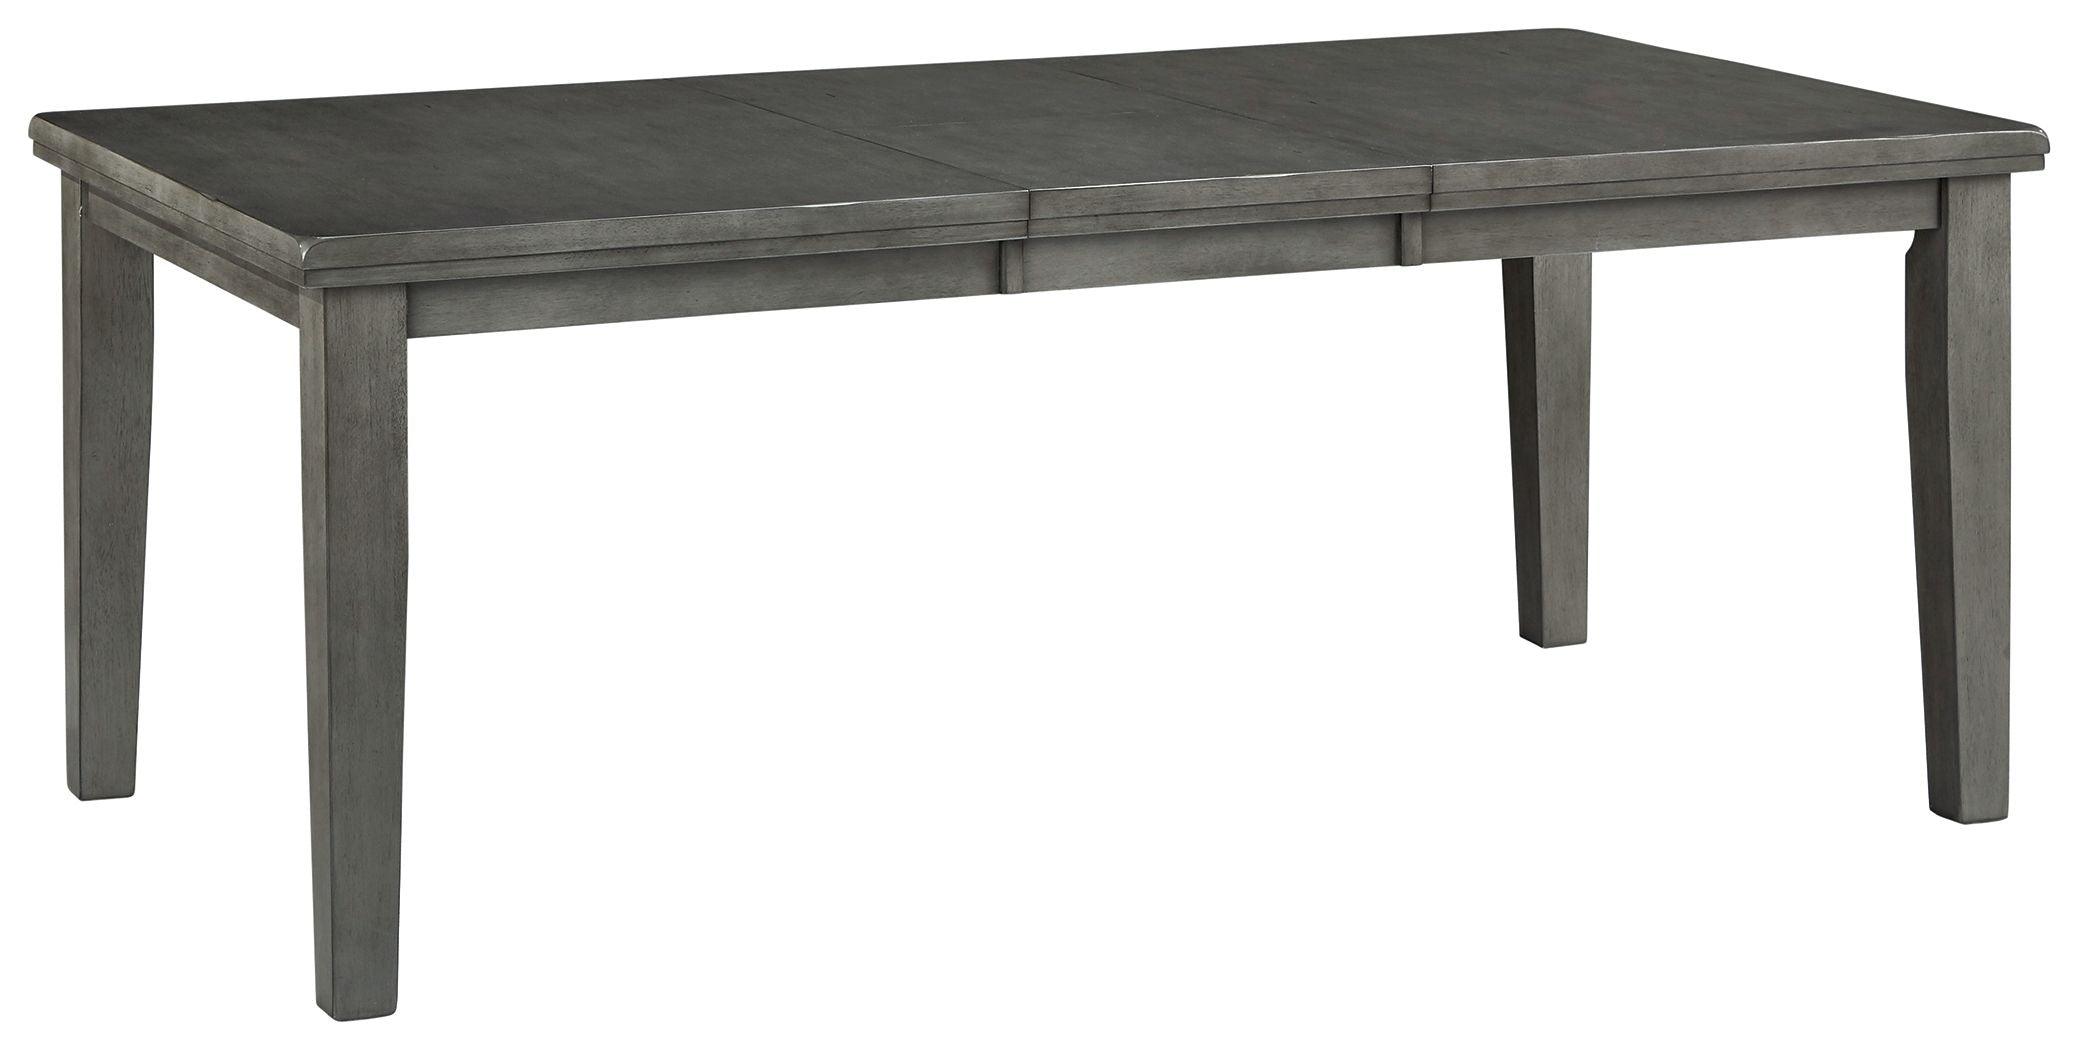 Ashley Furniture - Hallanden - Gray - Rectangular Dining Room Butterfly Extension Table - 5th Avenue Furniture